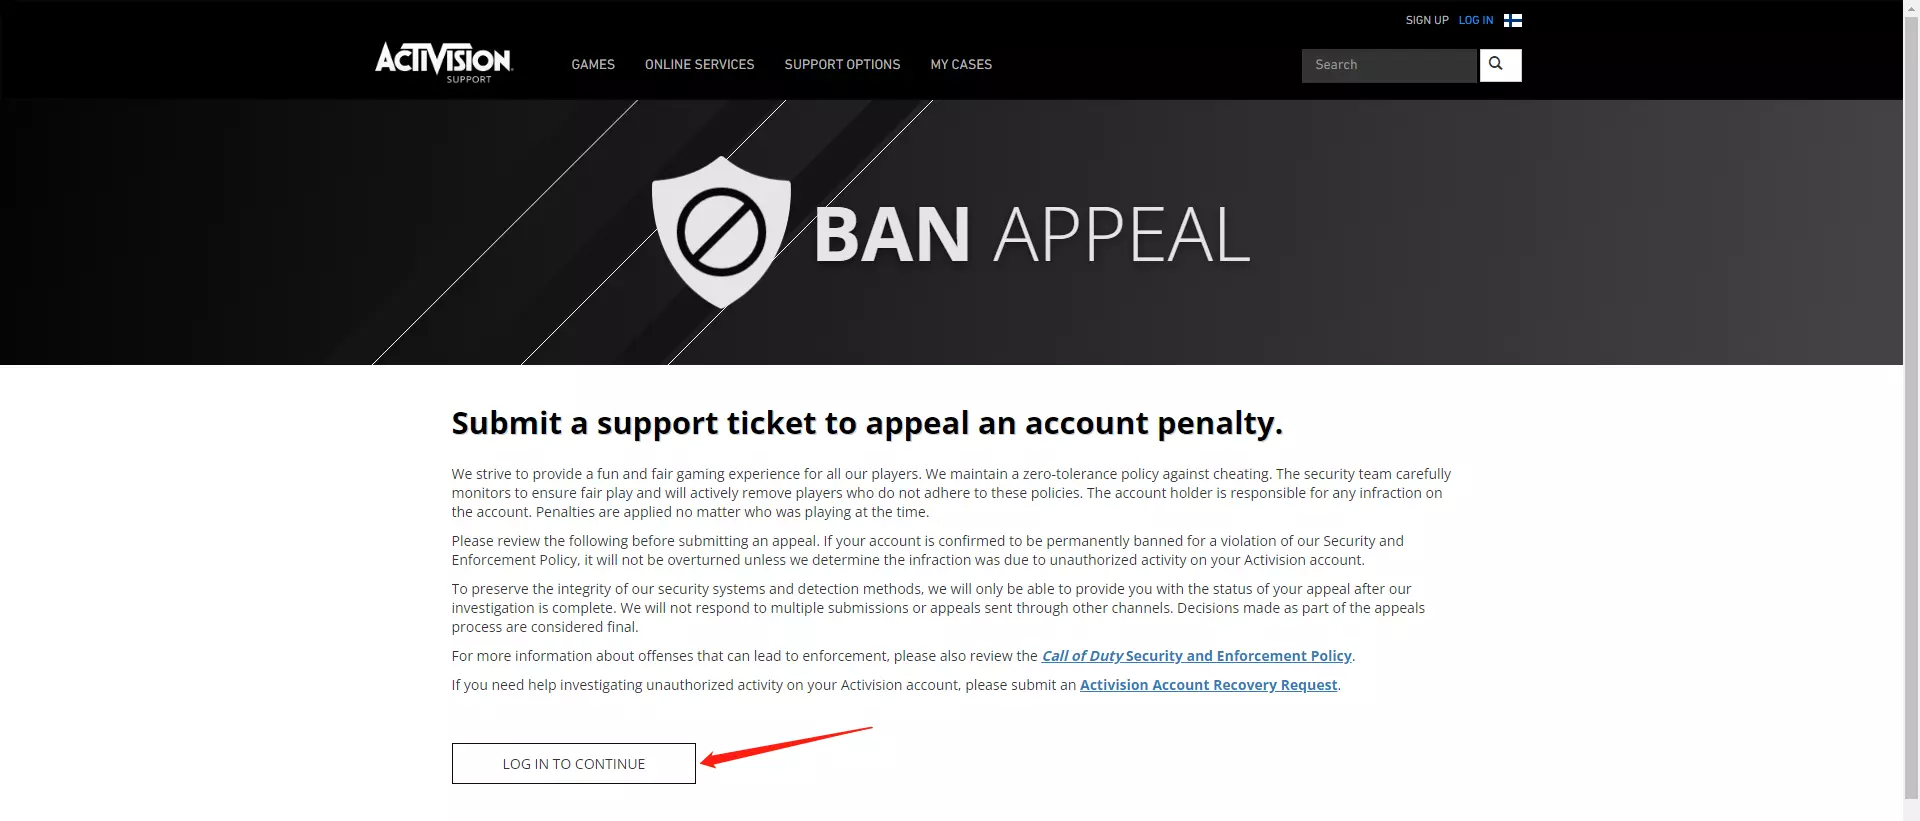 contact Activision and appeal against your ban